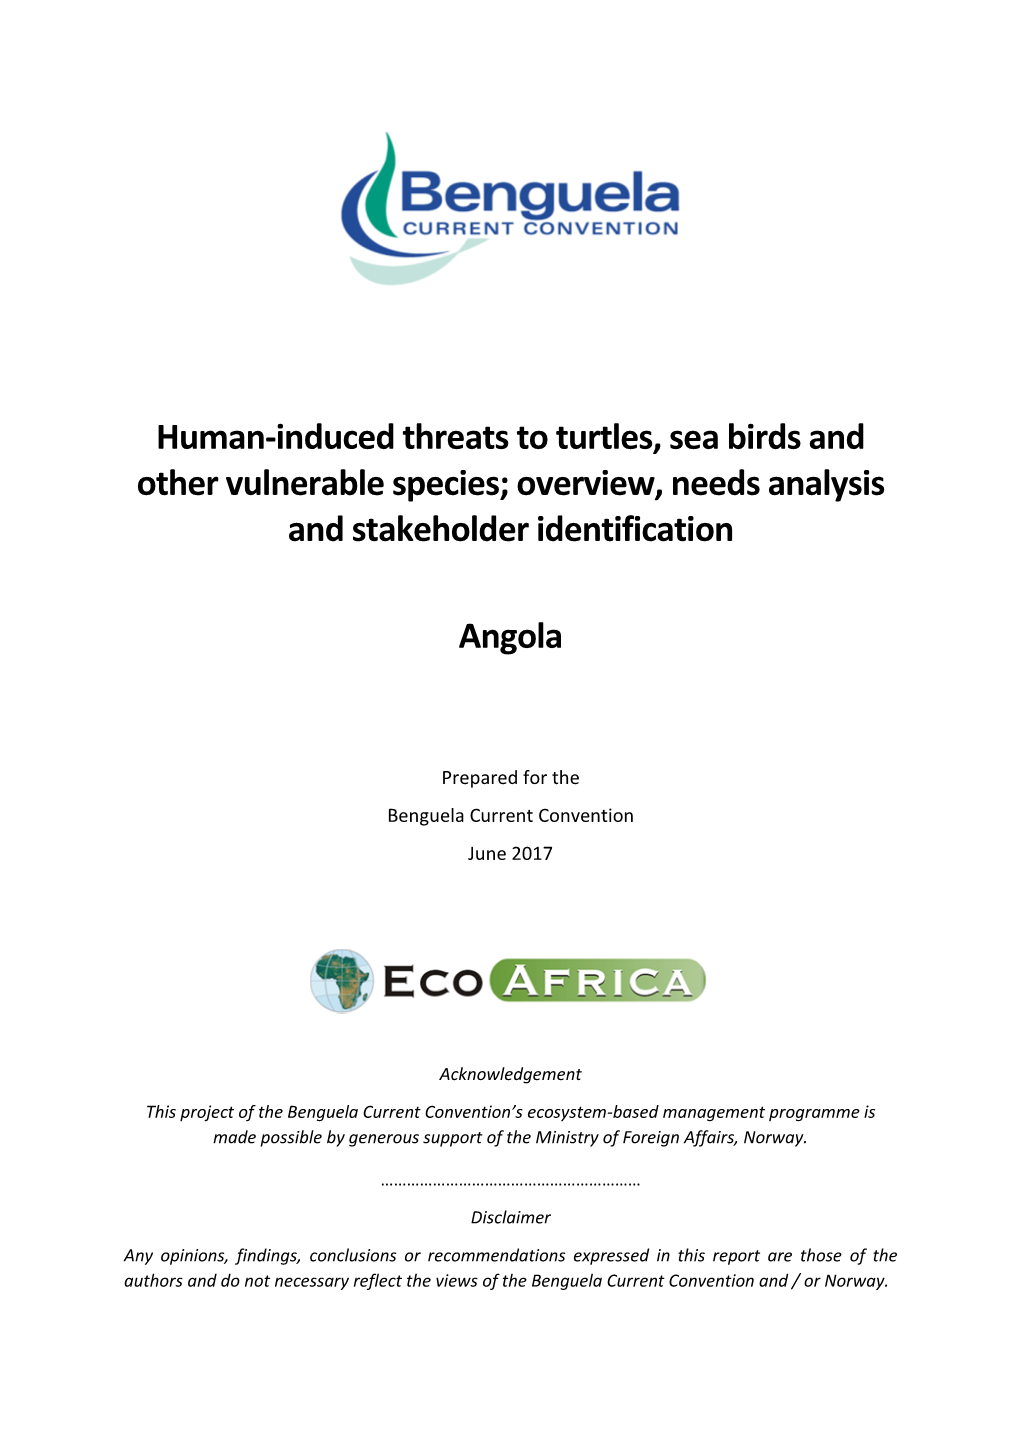 Human-Induced Threats to Turtles, Sea Birds and Other Vulnerable Species; Overview, Needs Analysis and Stakeholder Identification